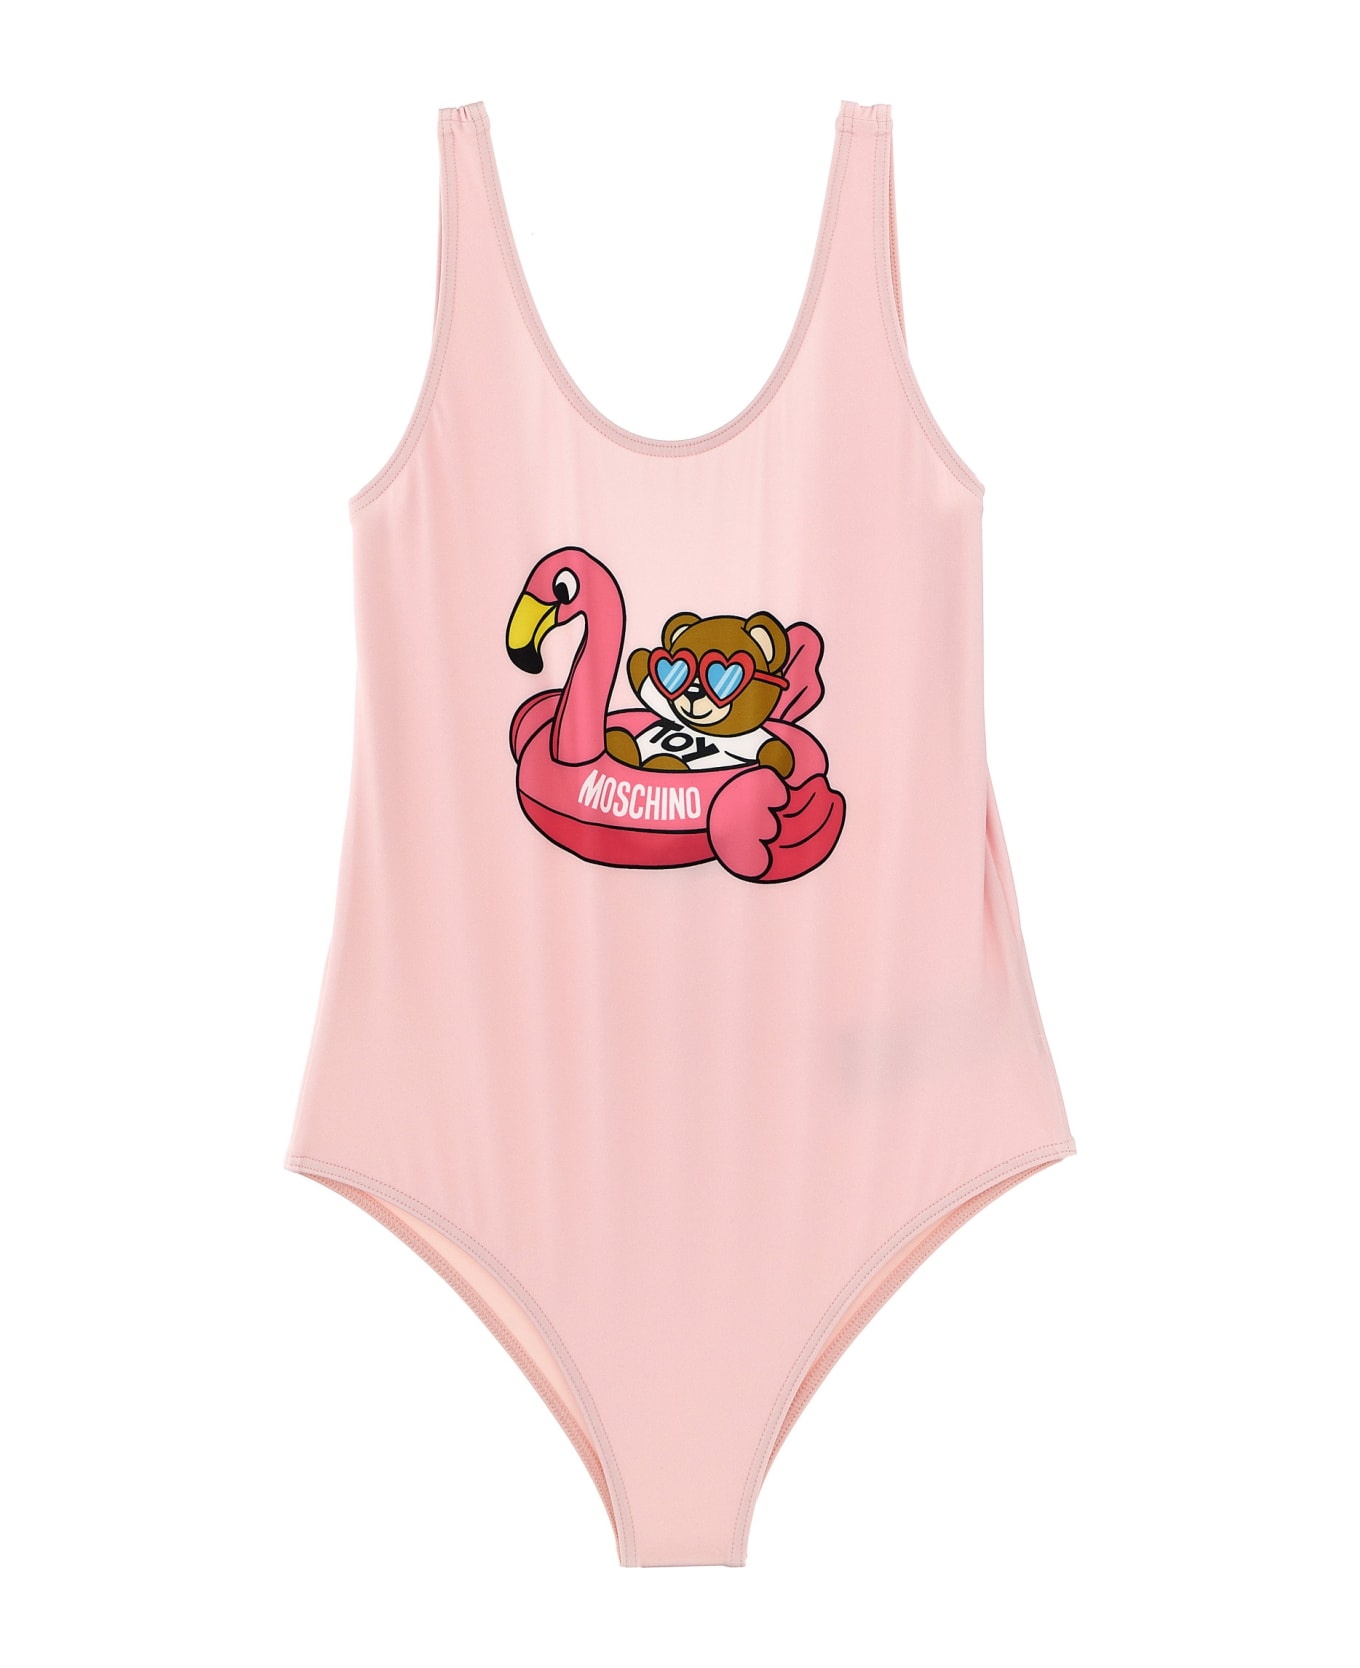 Moschino One-piece Swimsuit With Logo Print - Pink